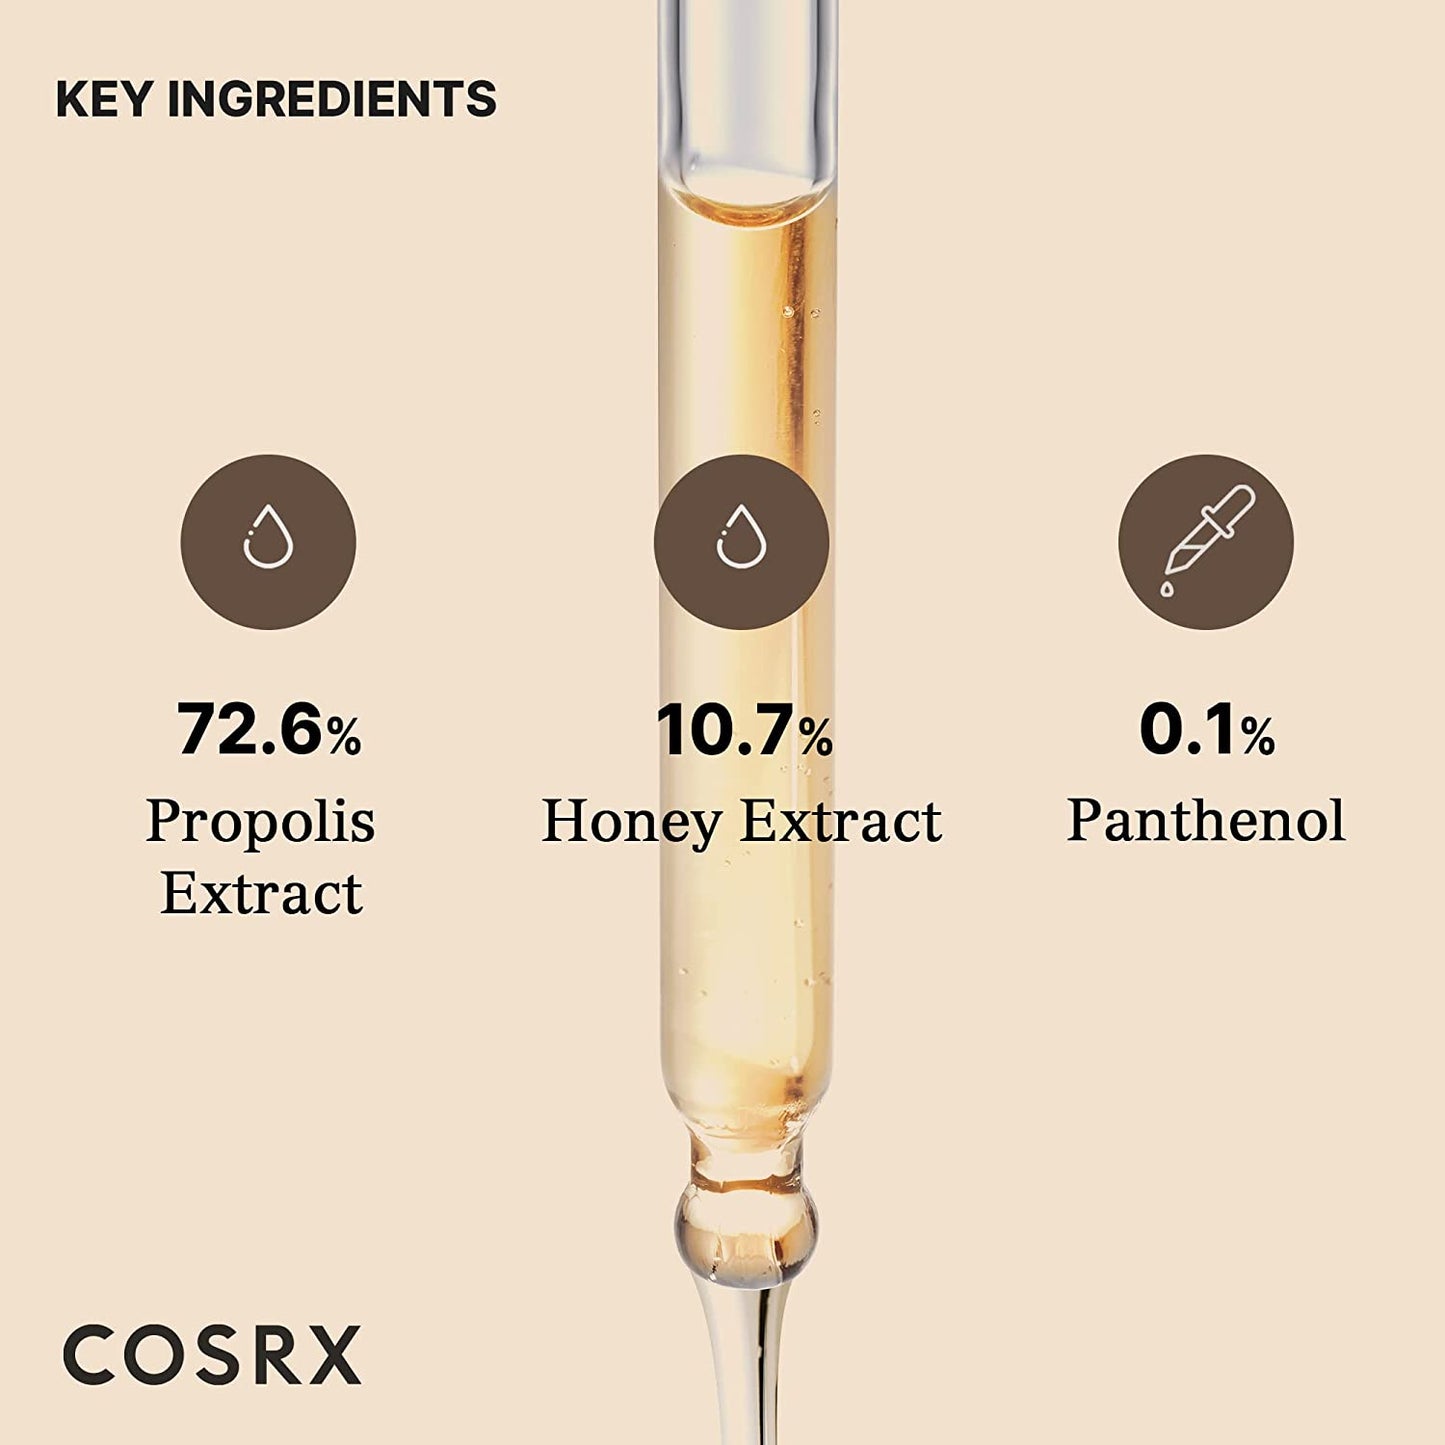 COSRX Propolis Ampoule, Glow Boosting Serum for Face with 73.5% Propolis Extract, 1.01 fl.oz / 30ml